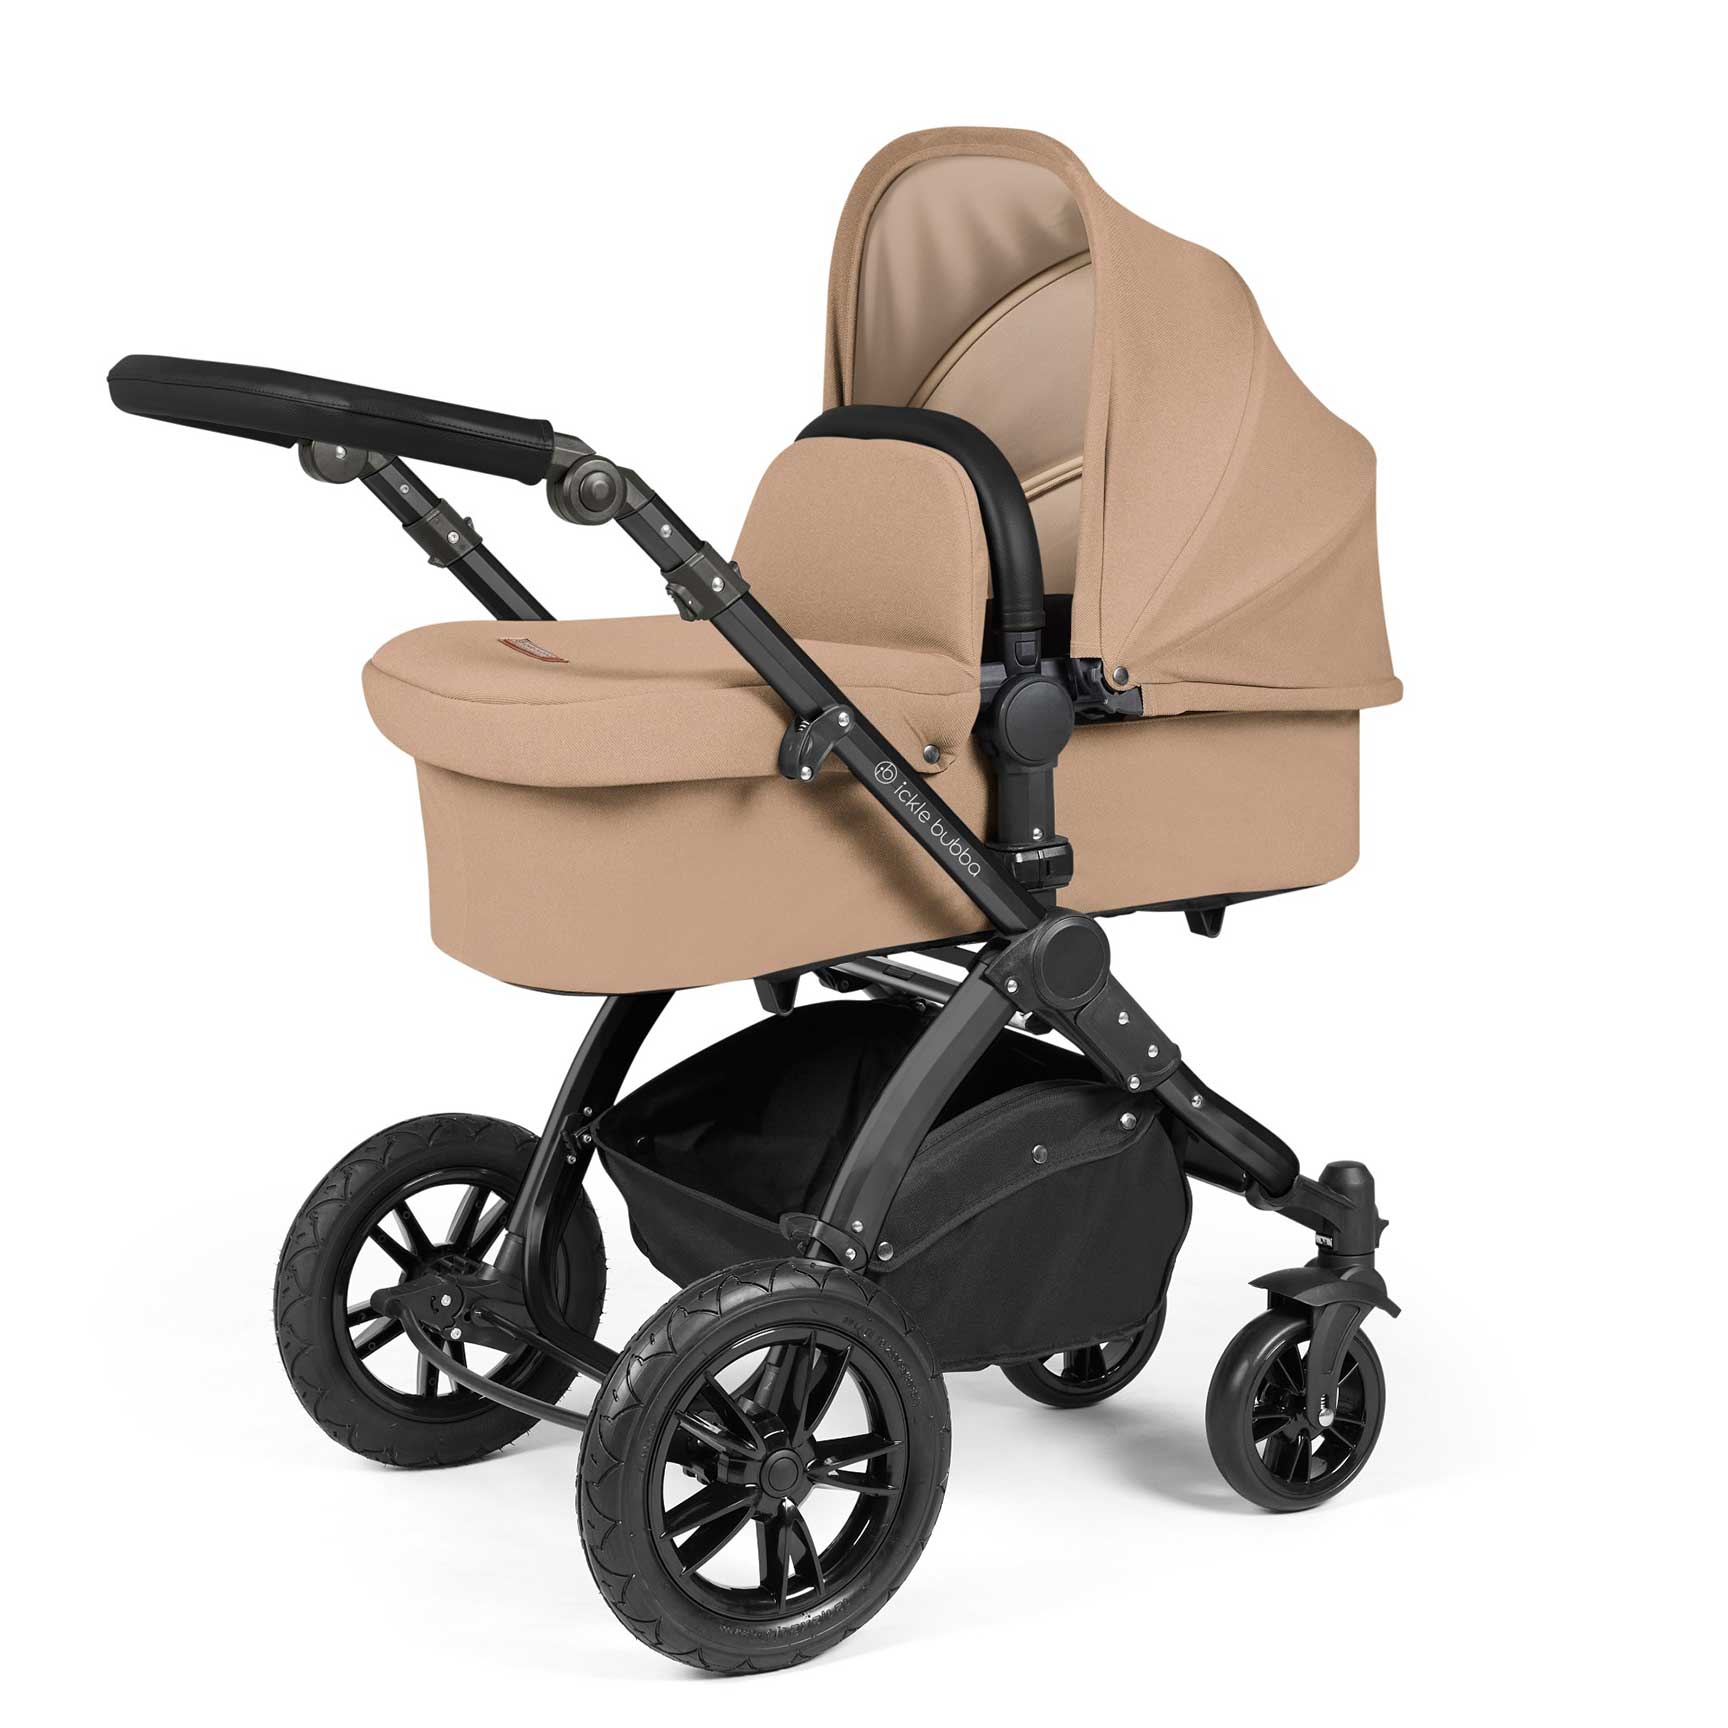 Ickle Bubba travel systems Ickle Bubba Stomp Luxe All-in-One Travel System with Isofix Base - Black/Desert/Black 10-011-300-208